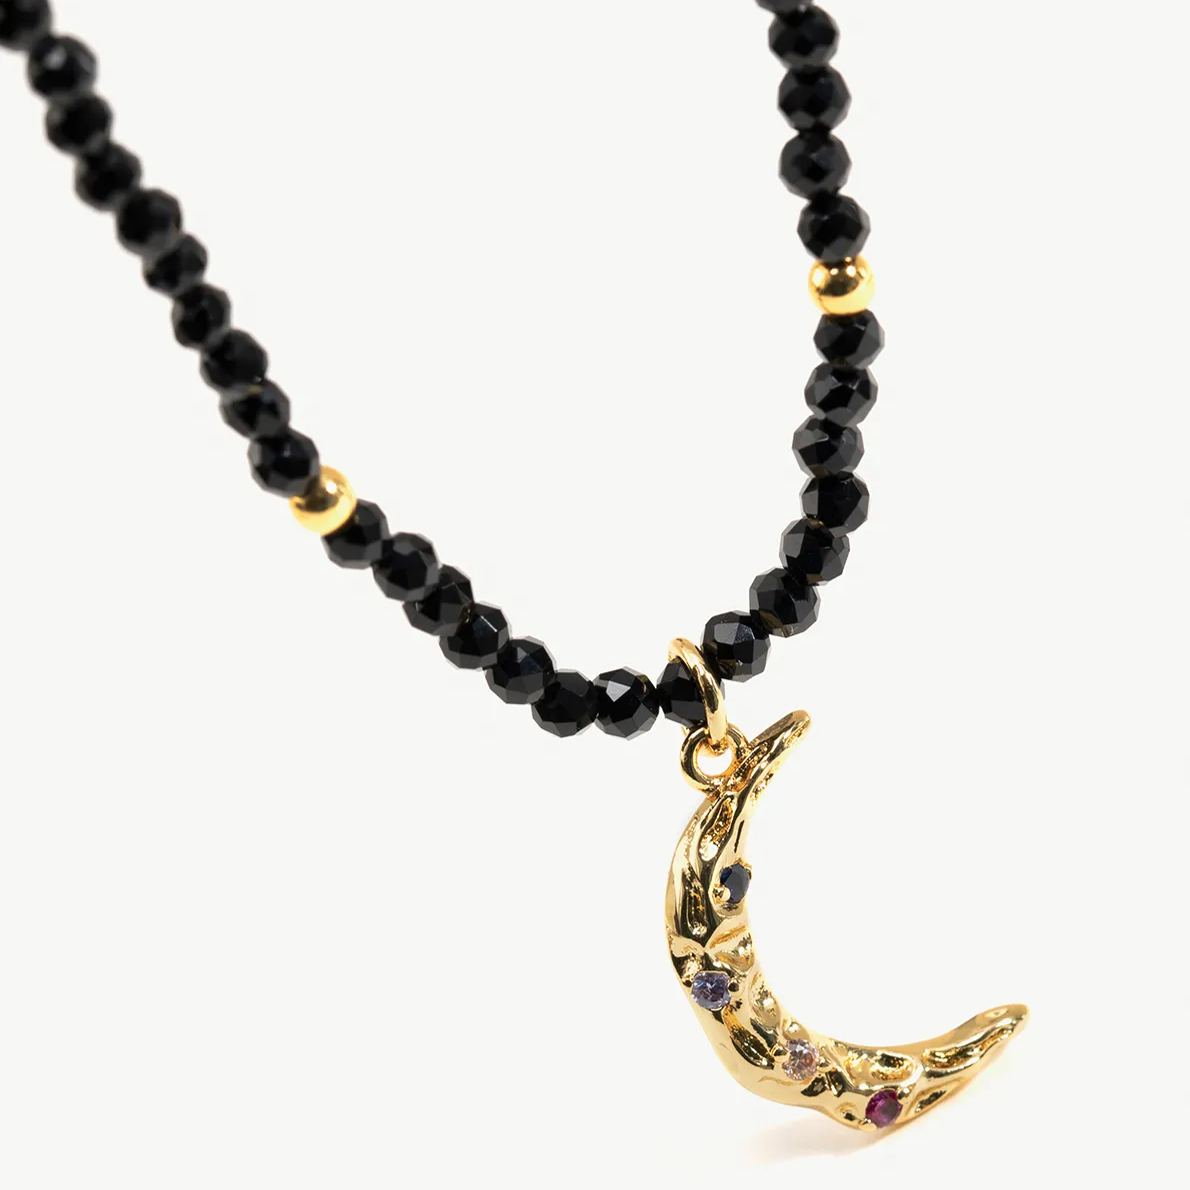 Black Moon Spinel Beaded Necklace